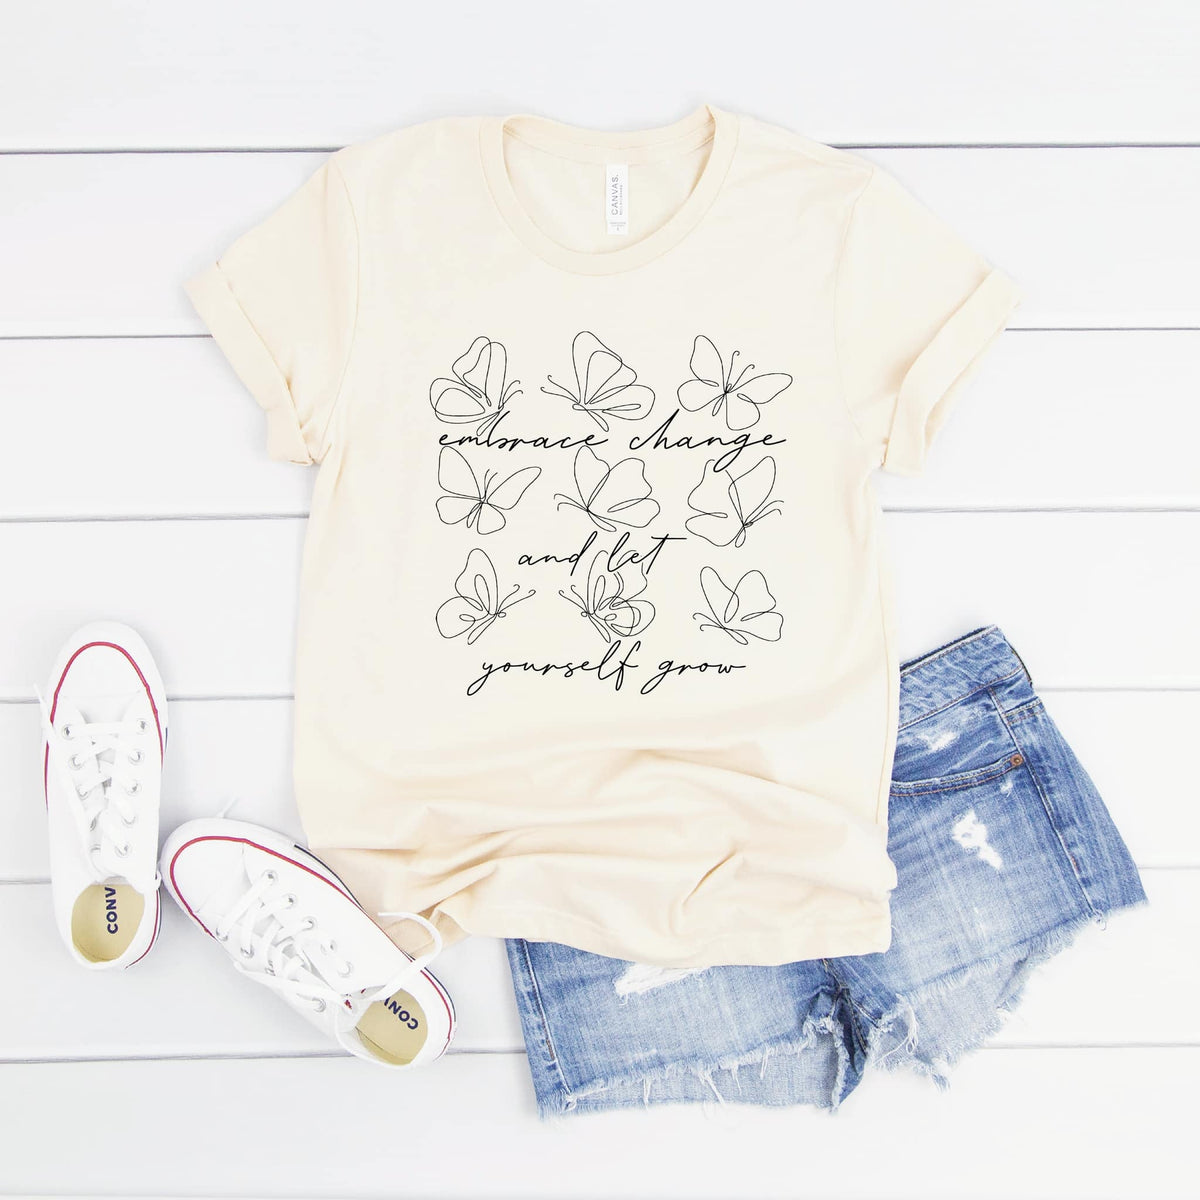 Embrace Change Butterflies Graphic Tee ALLOW 7 DAYS TO SHIP + SHIP TIME